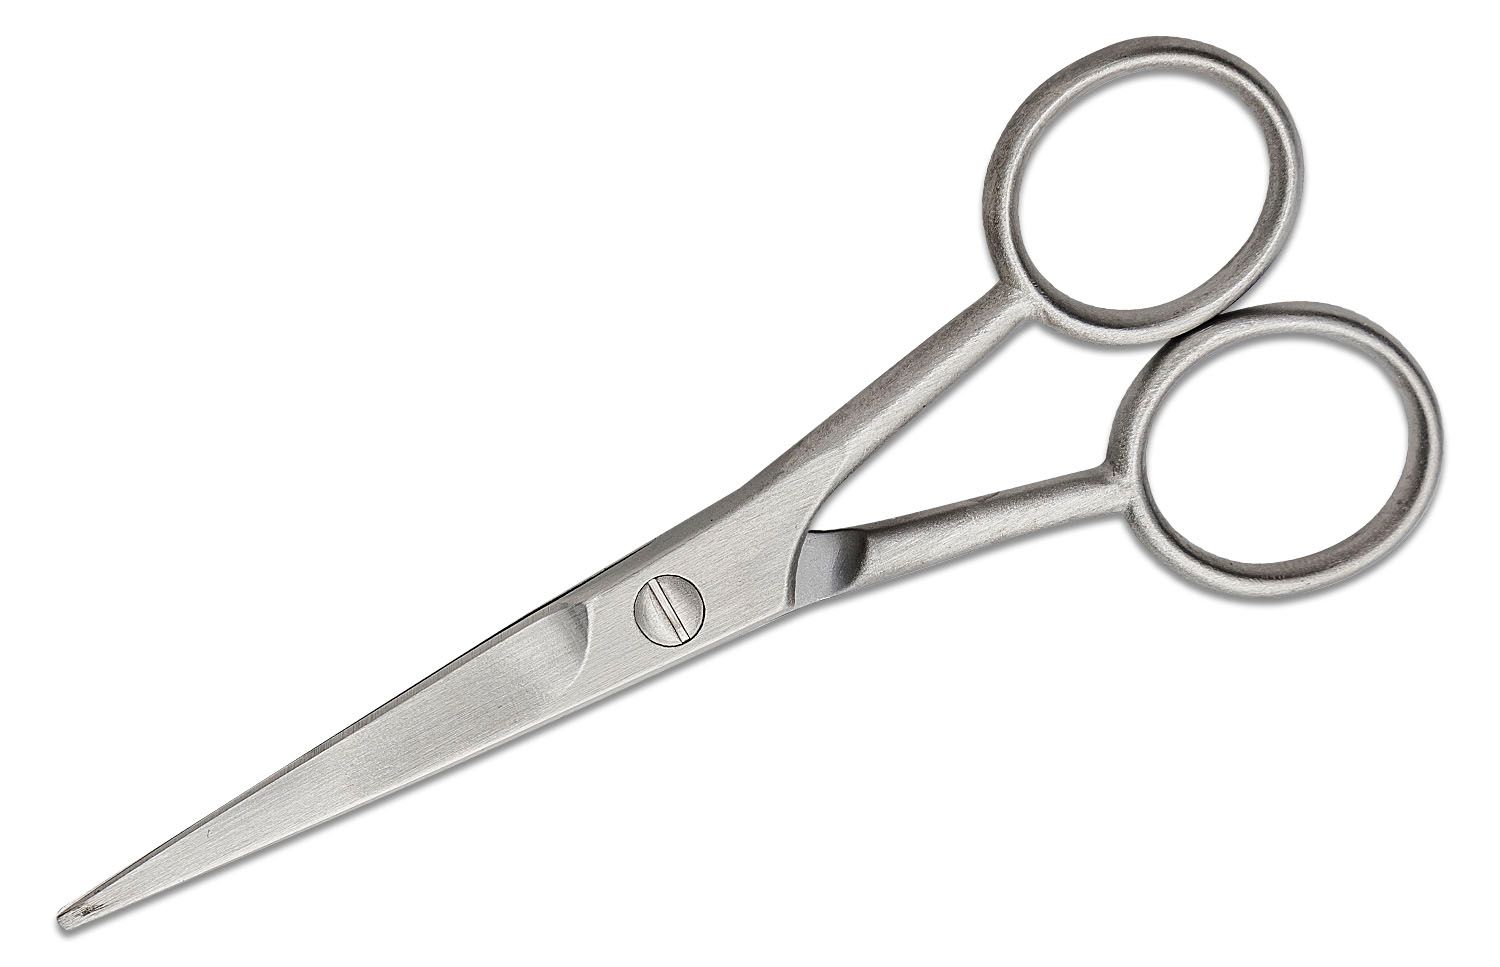 Kiehl Solingen 9cm Professional Cuticle Scissors, Curved Tower Pointed -  KnifeCenter - 4124 09 5316